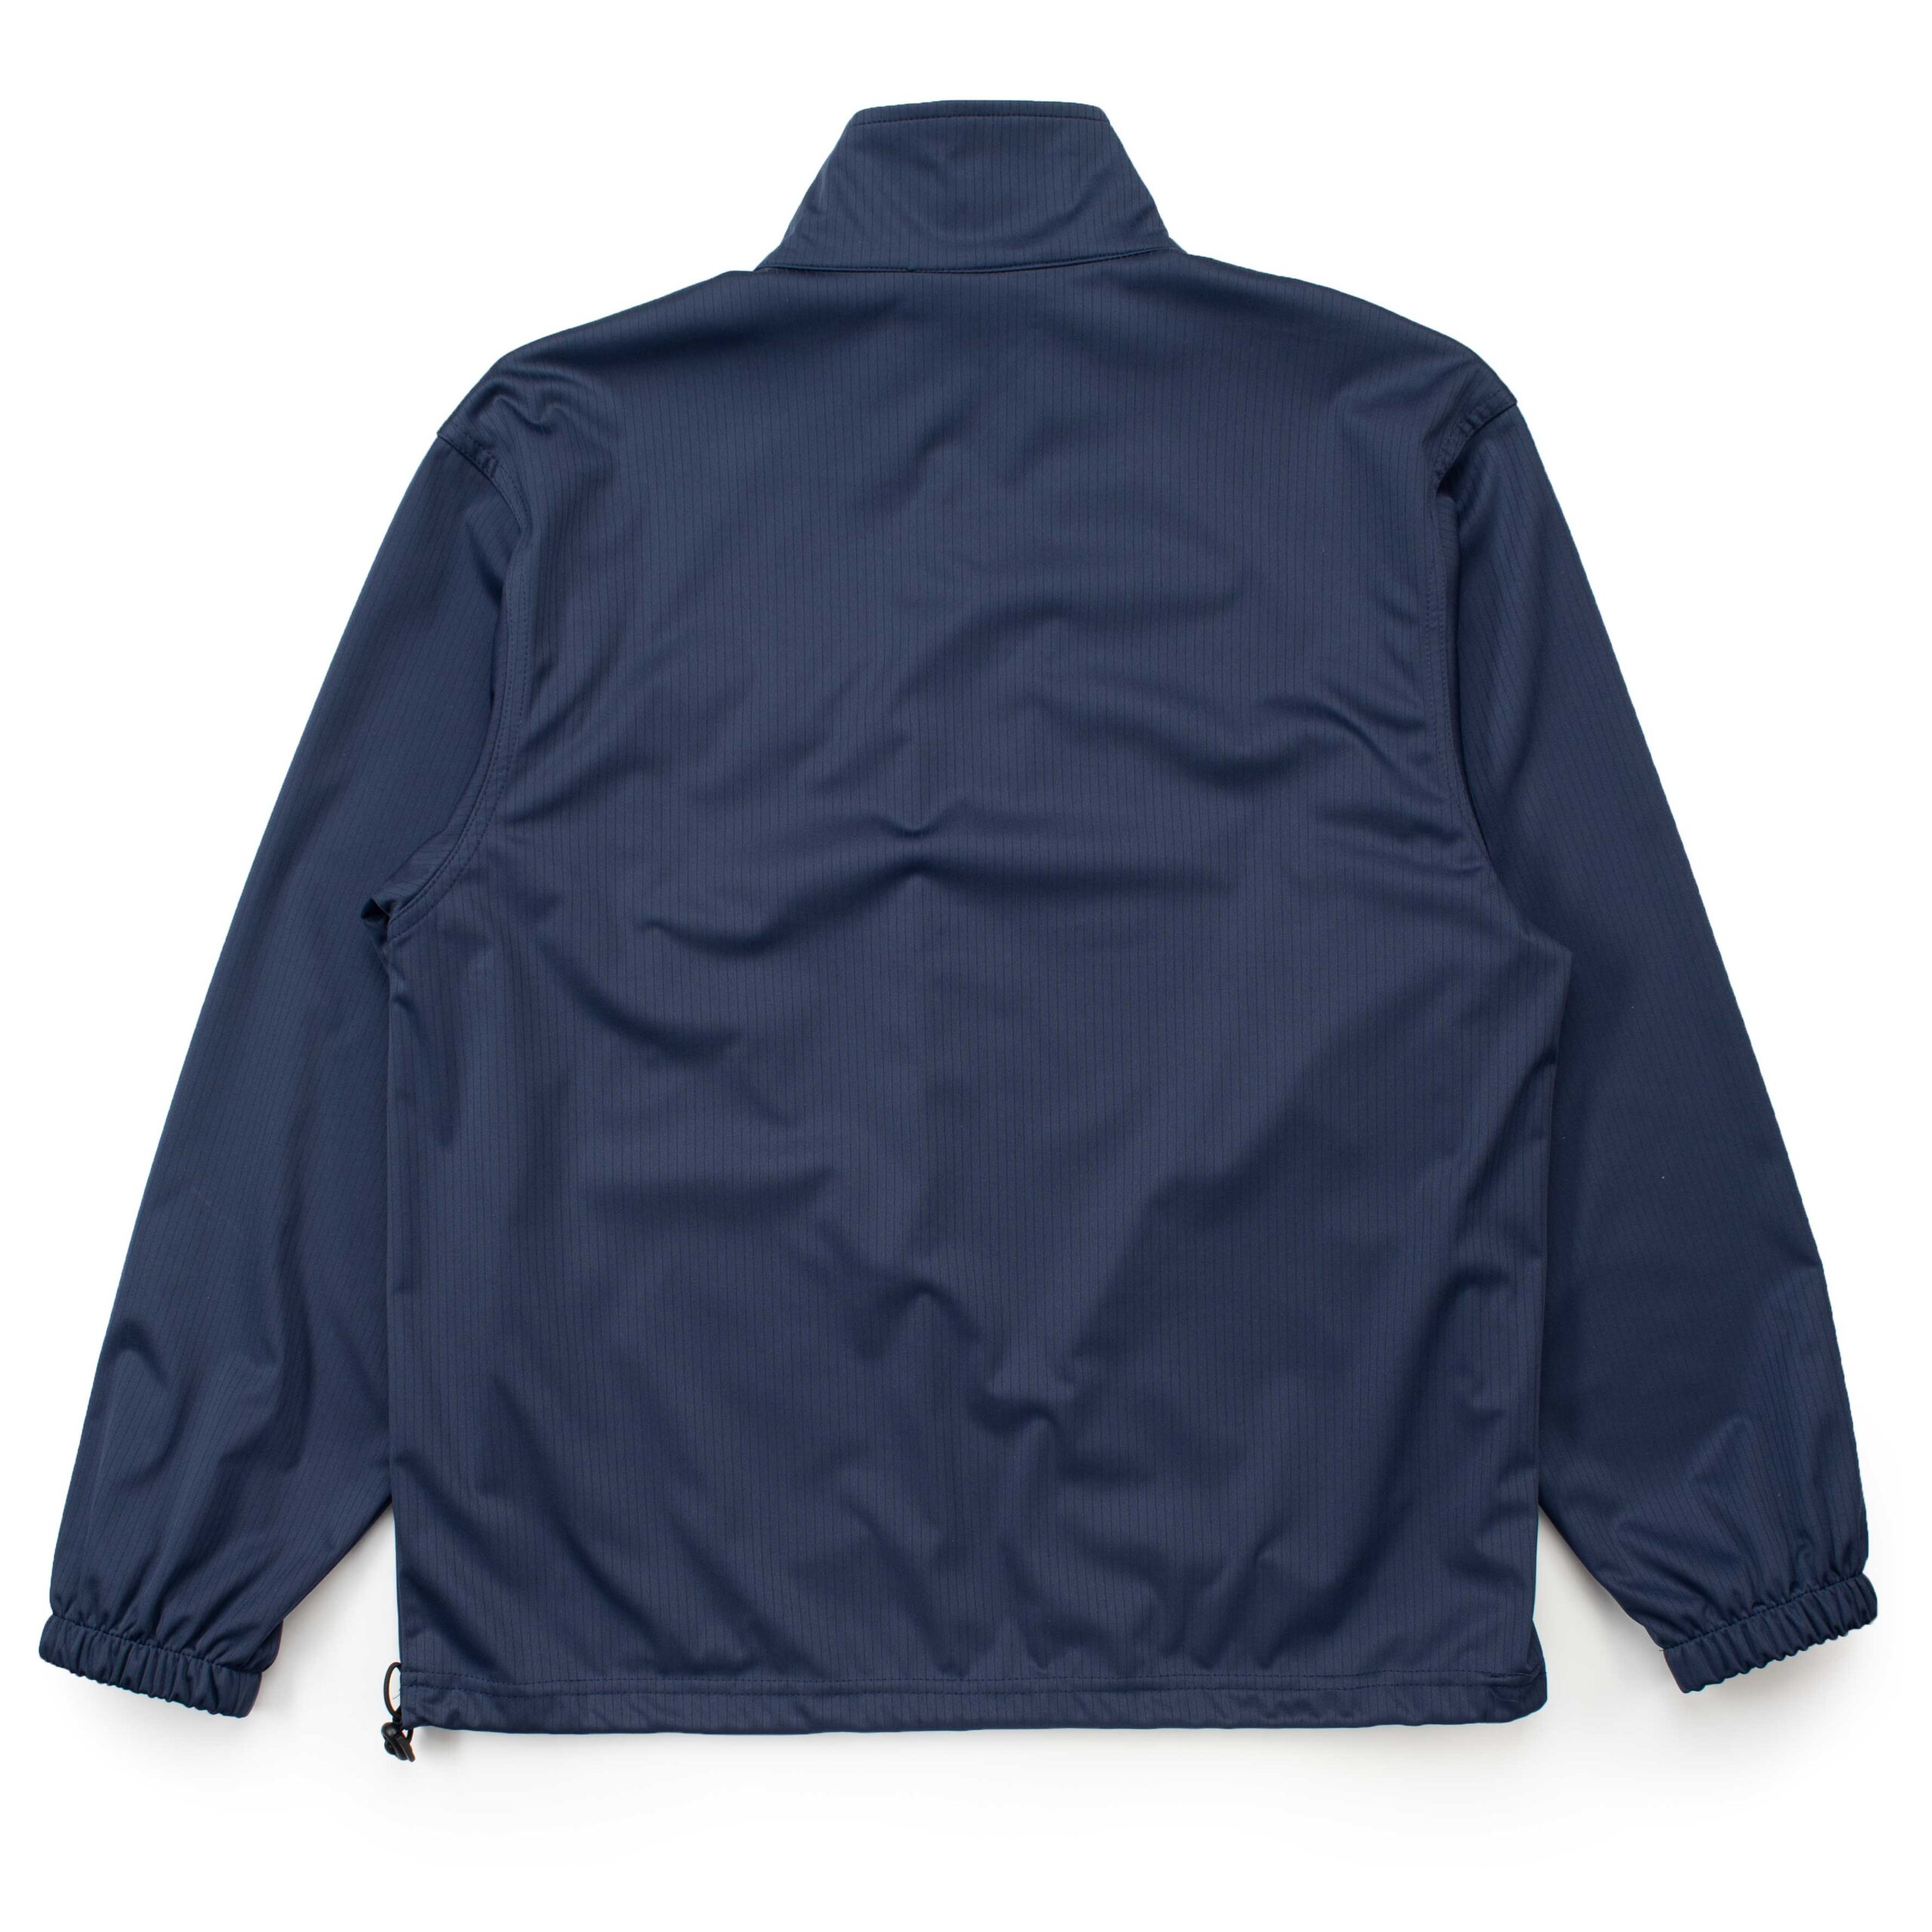 Soft Shell Jacket - Navy - USW Steelworker Store